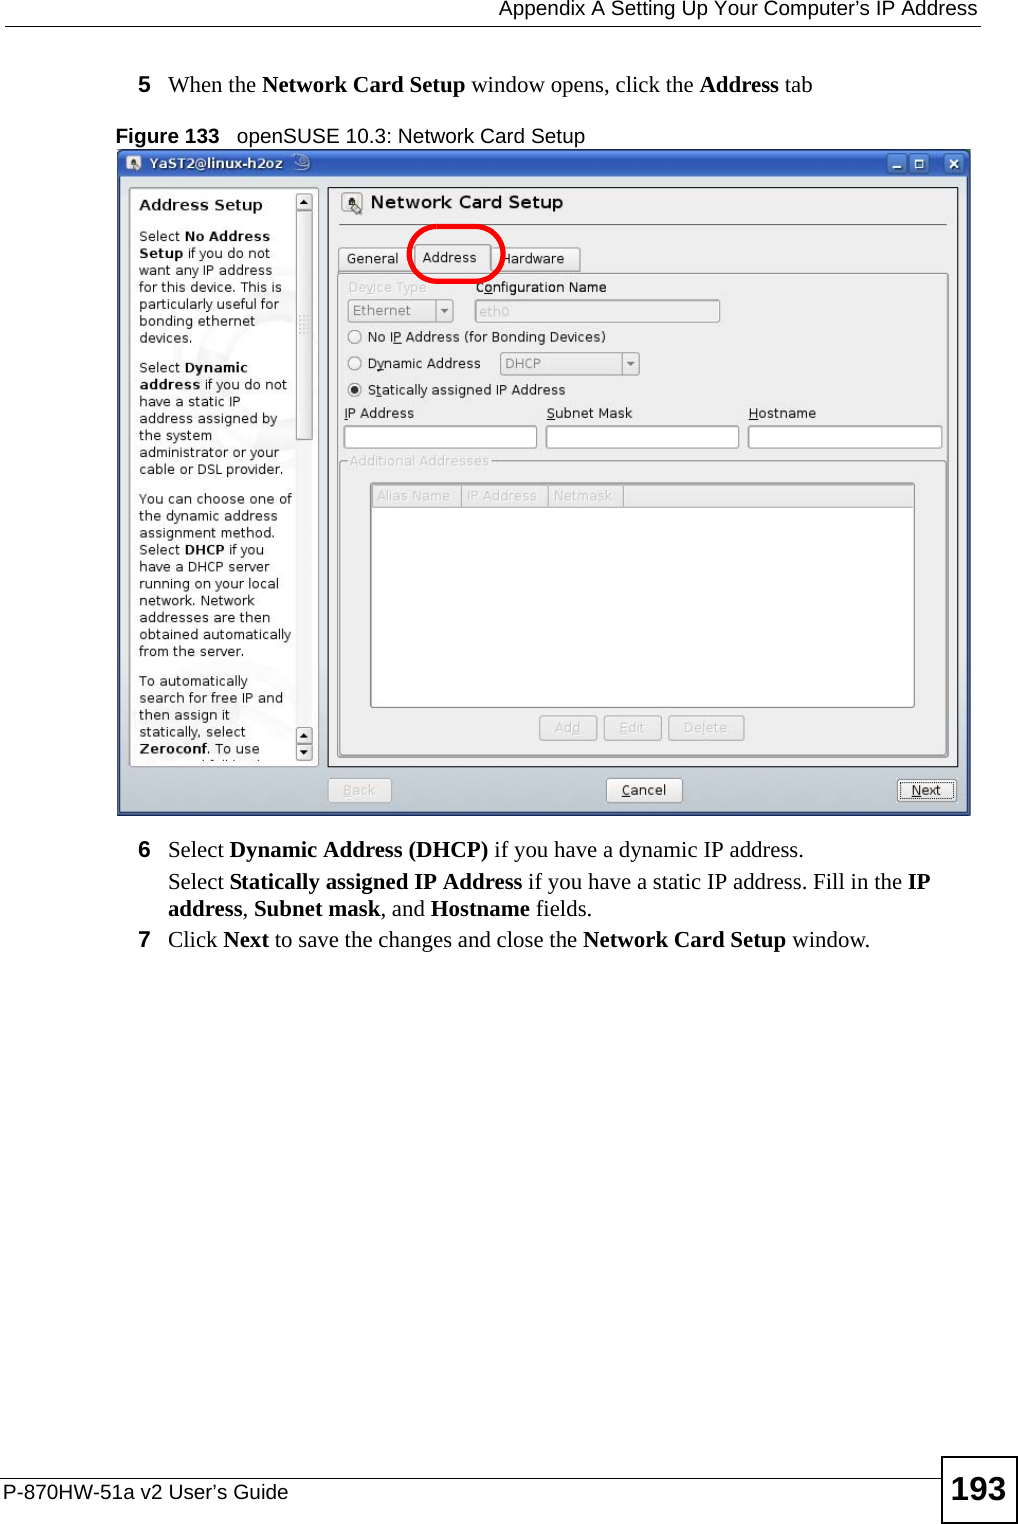  Appendix A Setting Up Your Computer’s IP AddressP-870HW-51a v2 User’s Guide 1935When the Network Card Setup window opens, click the Address tabFigure 133   openSUSE 10.3: Network Card Setup6Select Dynamic Address (DHCP) if you have a dynamic IP address.Select Statically assigned IP Address if you have a static IP address. Fill in the IP address, Subnet mask, and Hostname fields.7Click Next to save the changes and close the Network Card Setup window. 